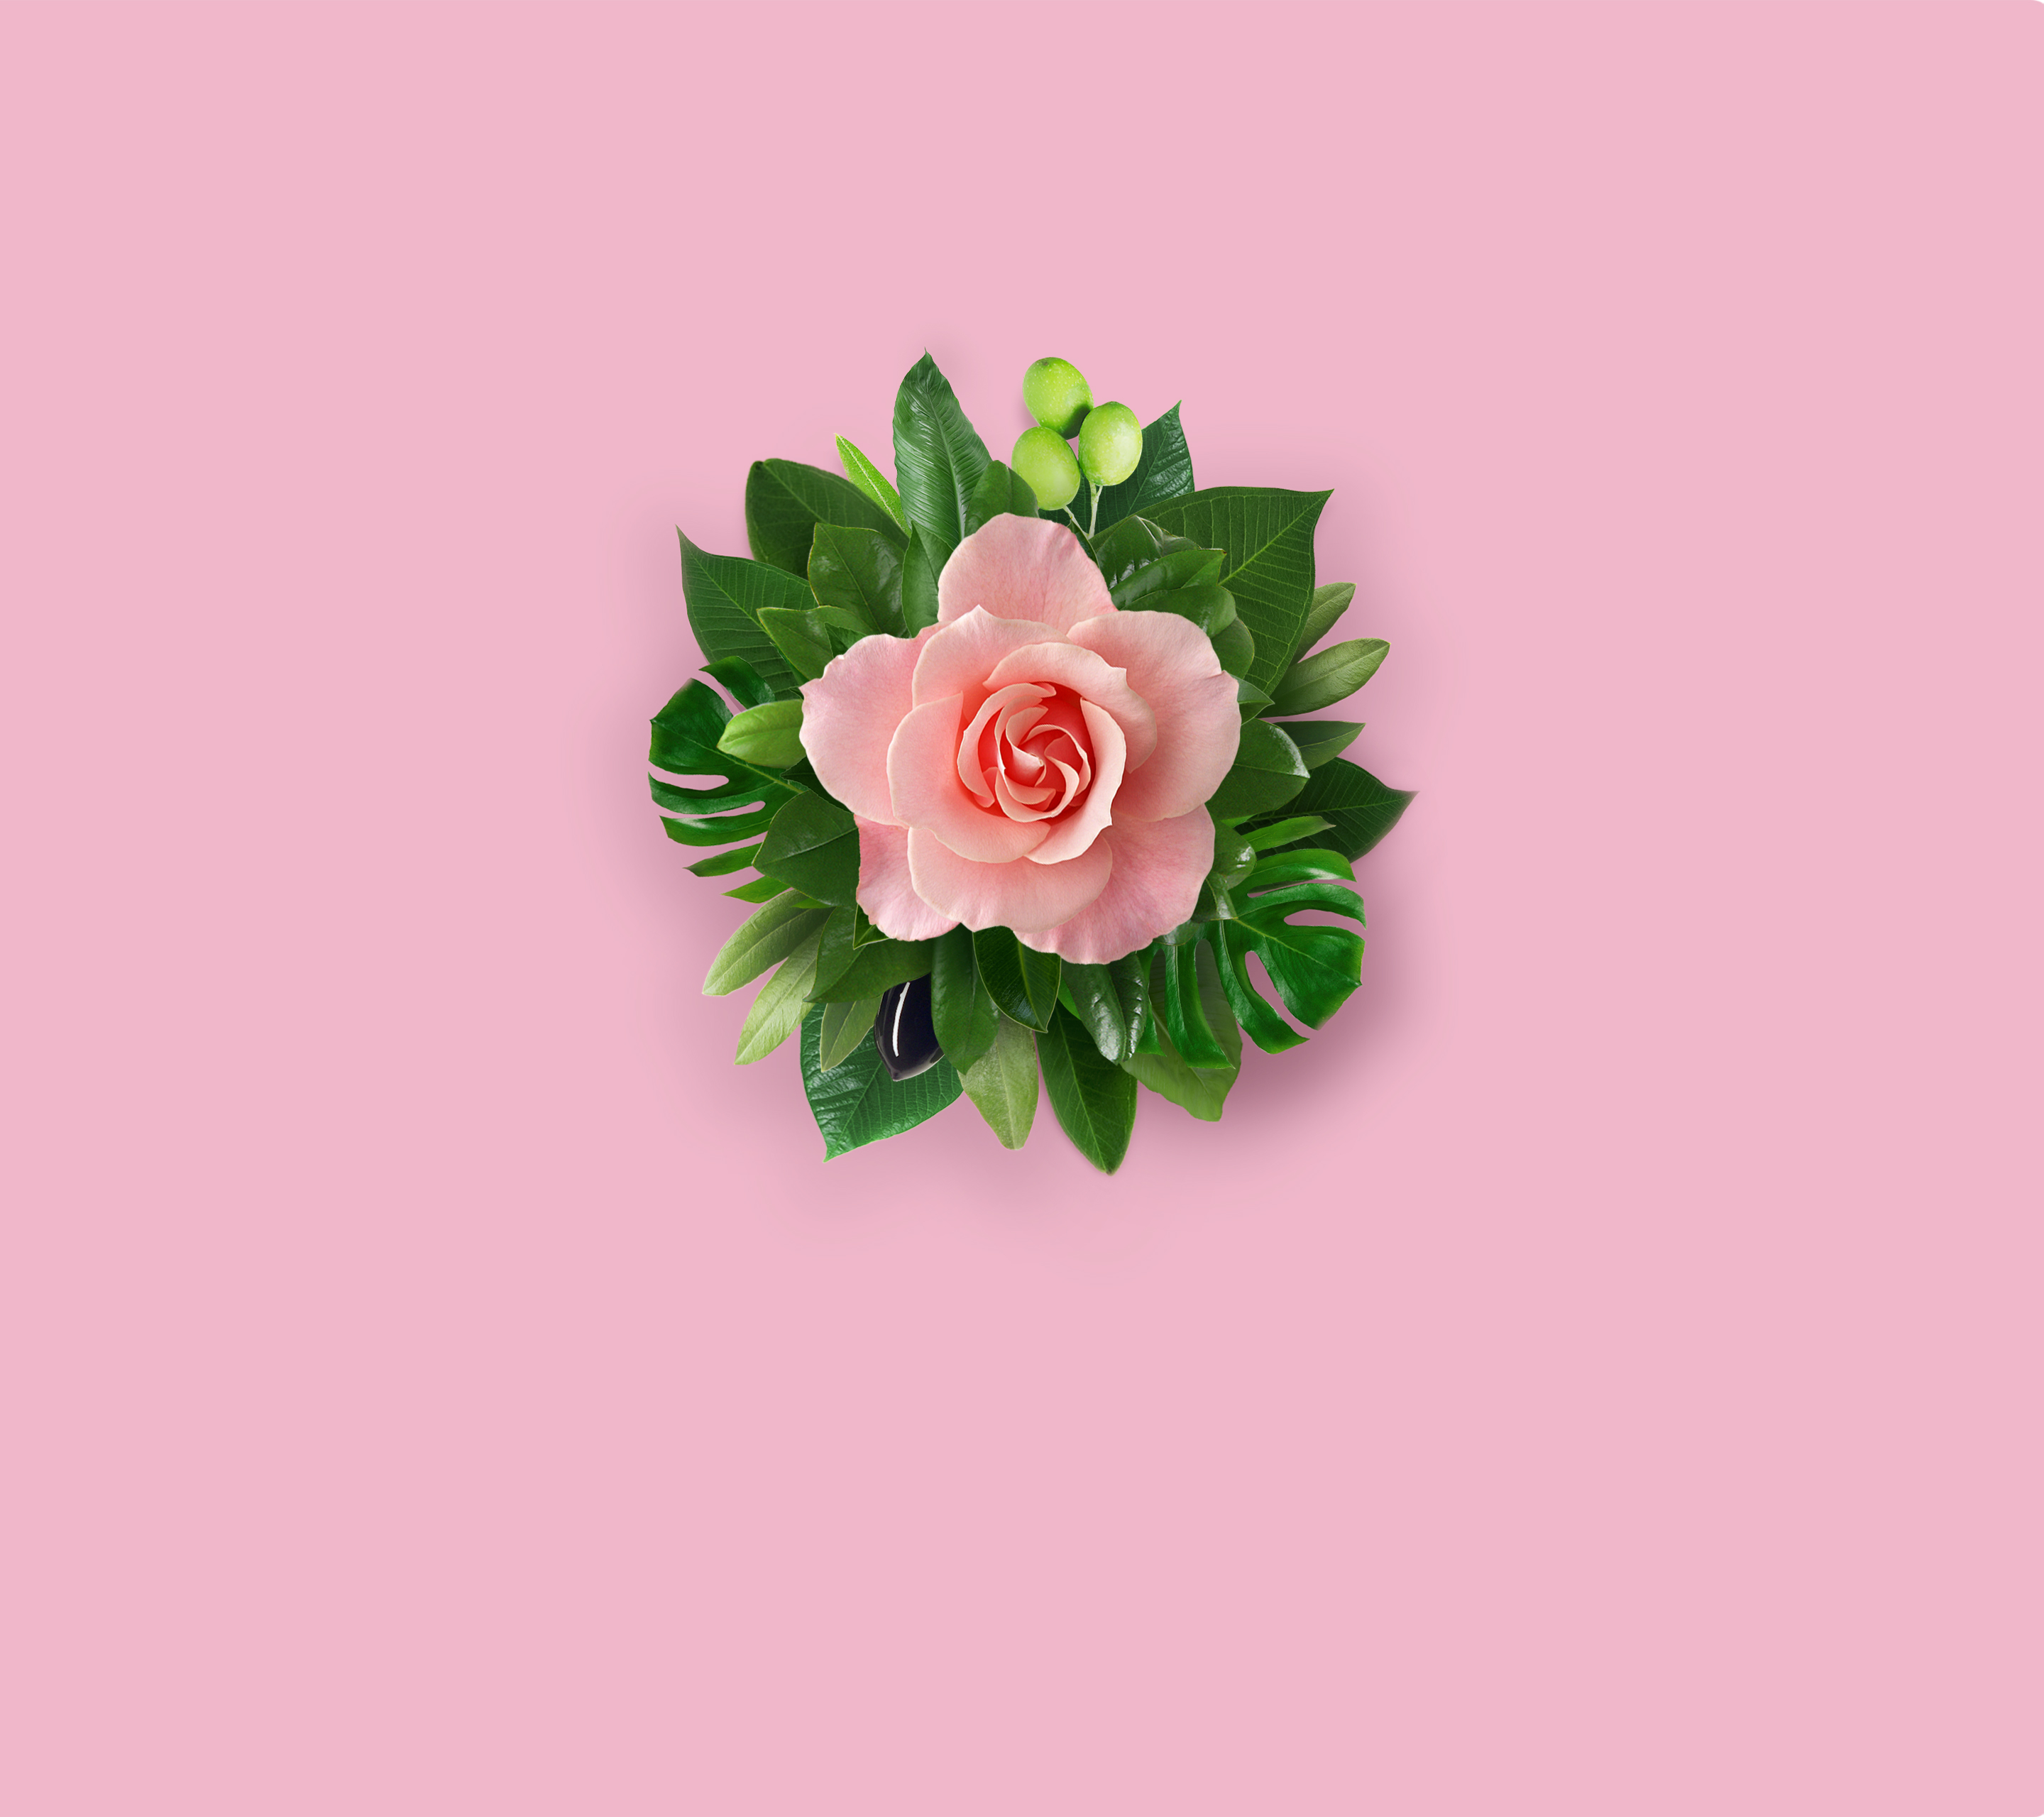 General 2880x2560 pink pink flowers pink background flowers